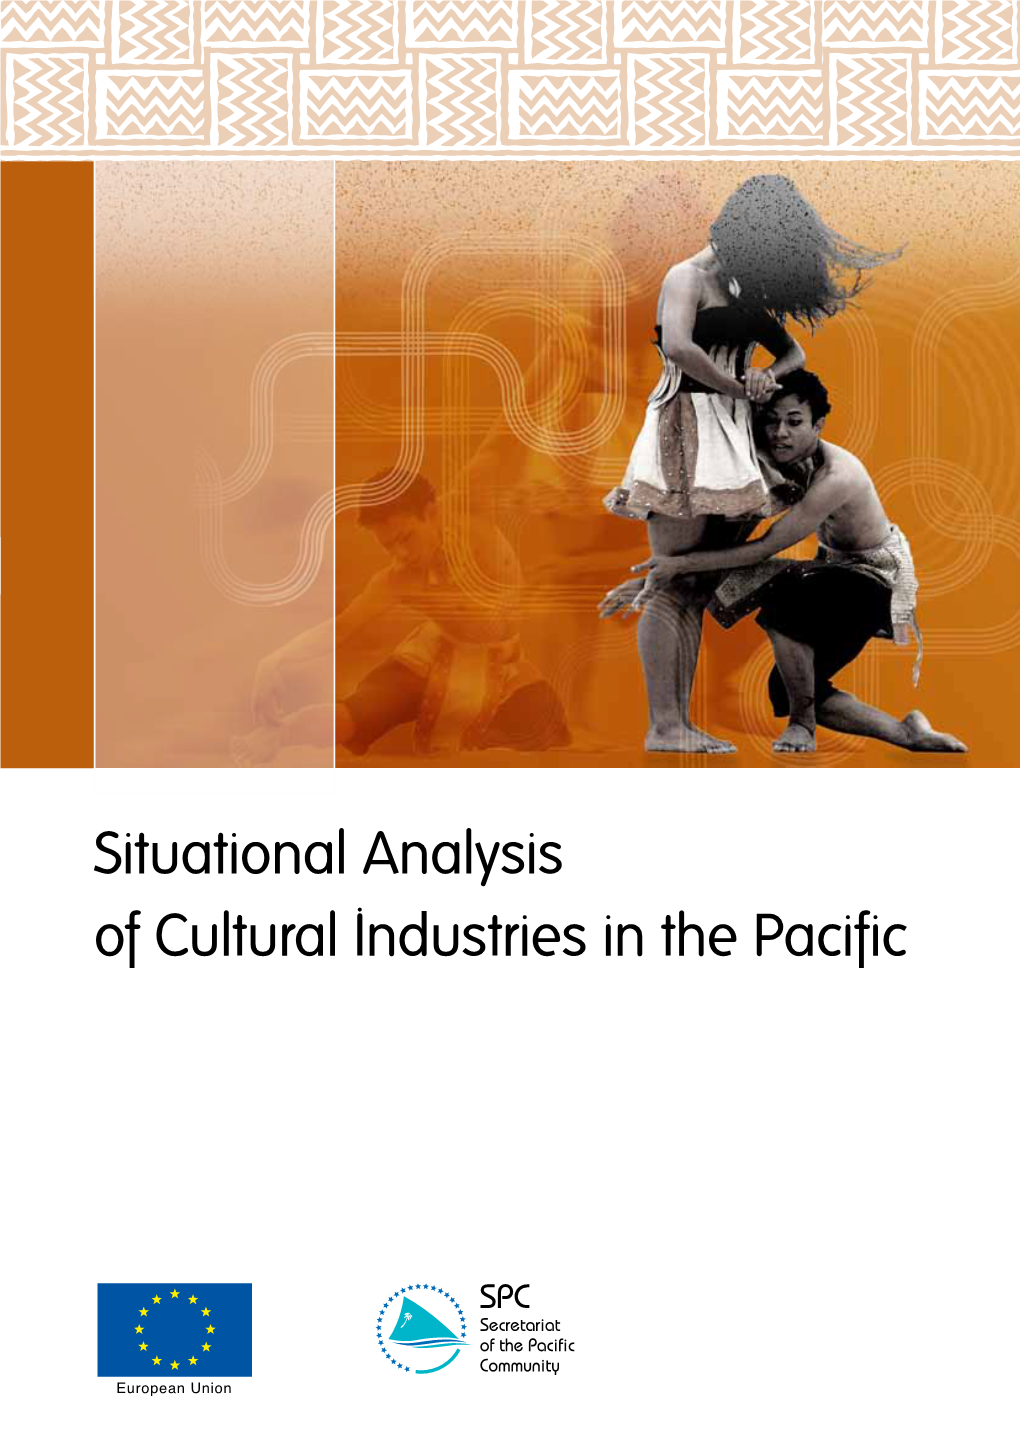 Situational Analysis of Cultural Industries in the Pacific